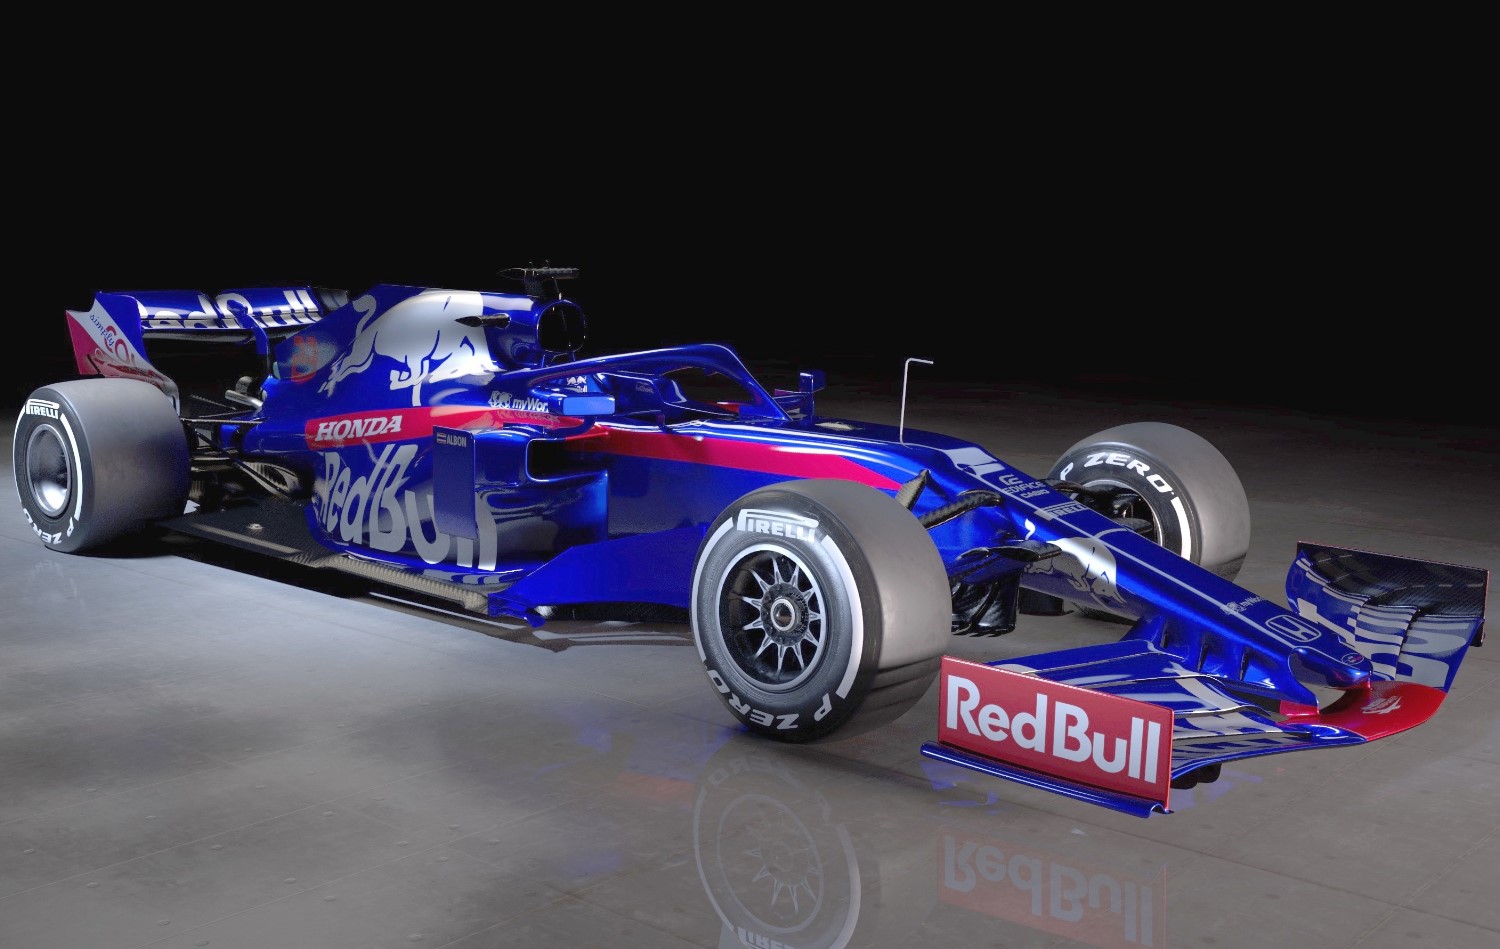 The new Toro Rosso looks a lot like last year's Red Bull except for the front wing